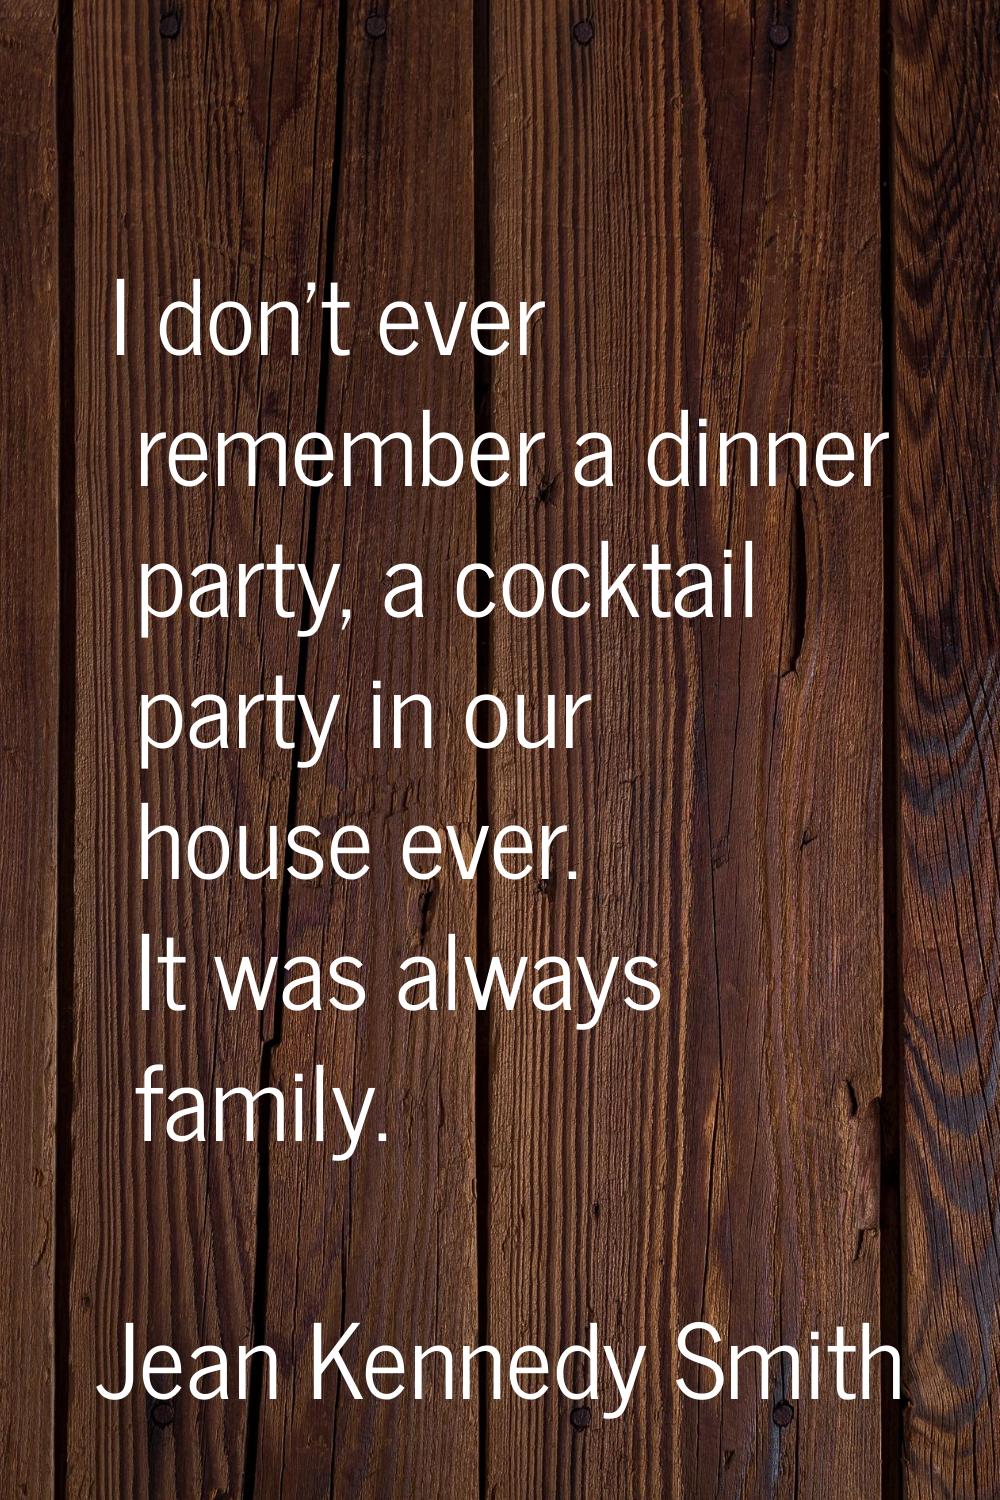 I don't ever remember a dinner party, a cocktail party in our house ever. It was always family.